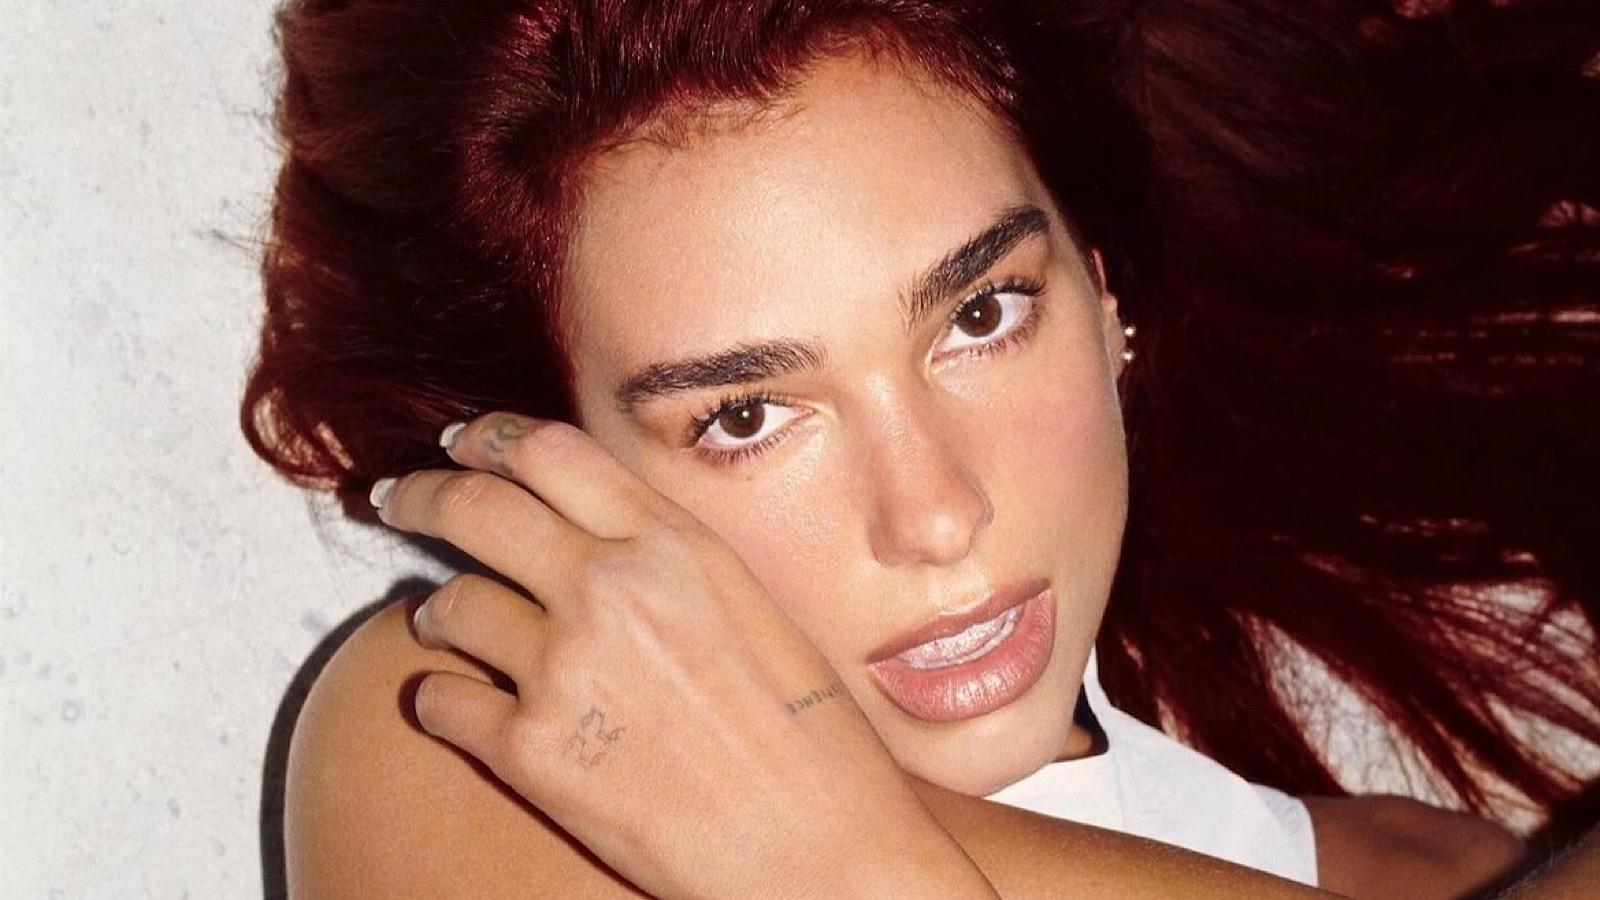 dua lipa previewed a new hair color and wrote a cryptic messge to IG